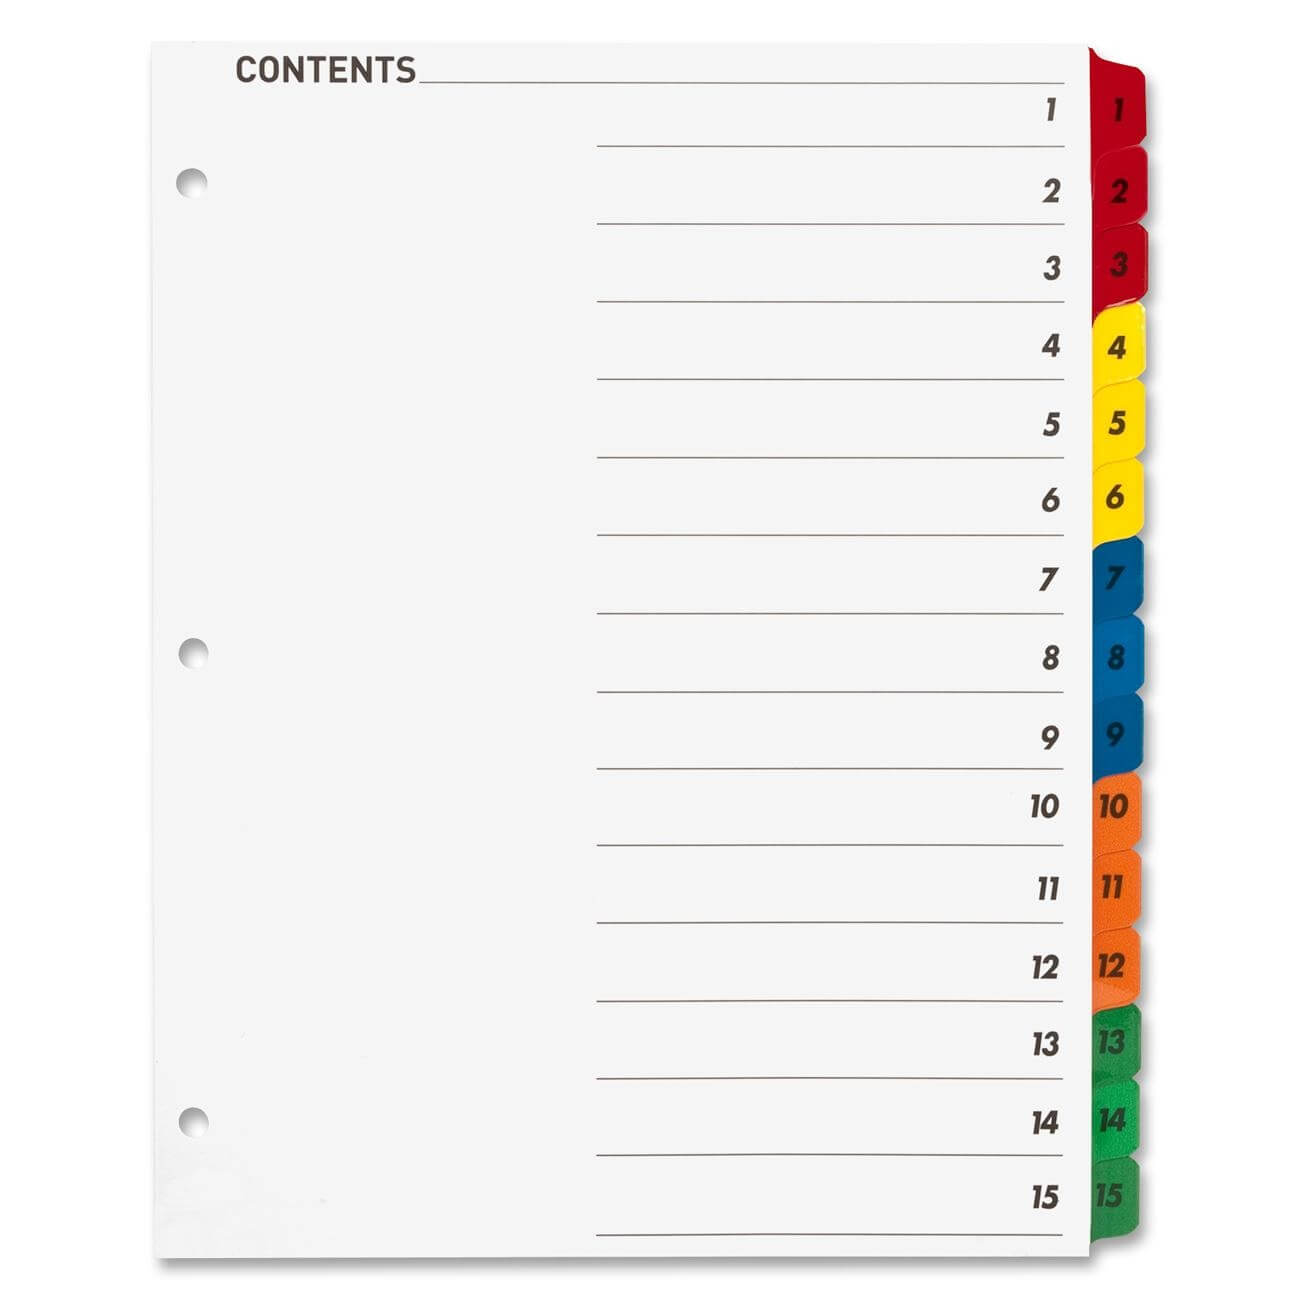 Blank Table Of Contents Layout | Cinemas 93 In Blank Table Of Contents Template